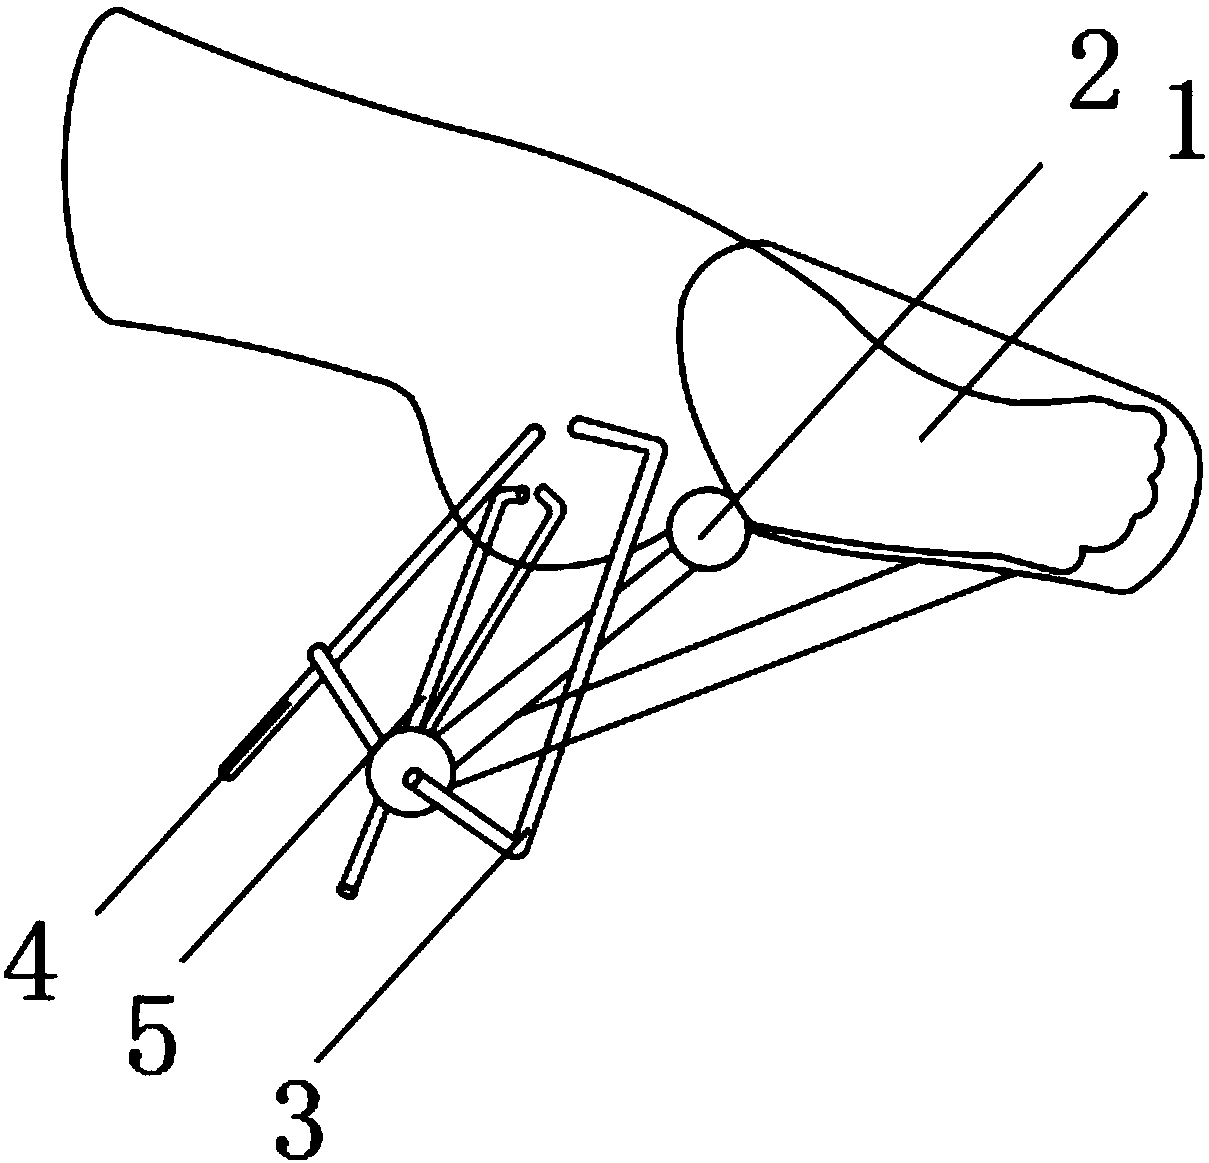 Calcaneal fracture reduction device